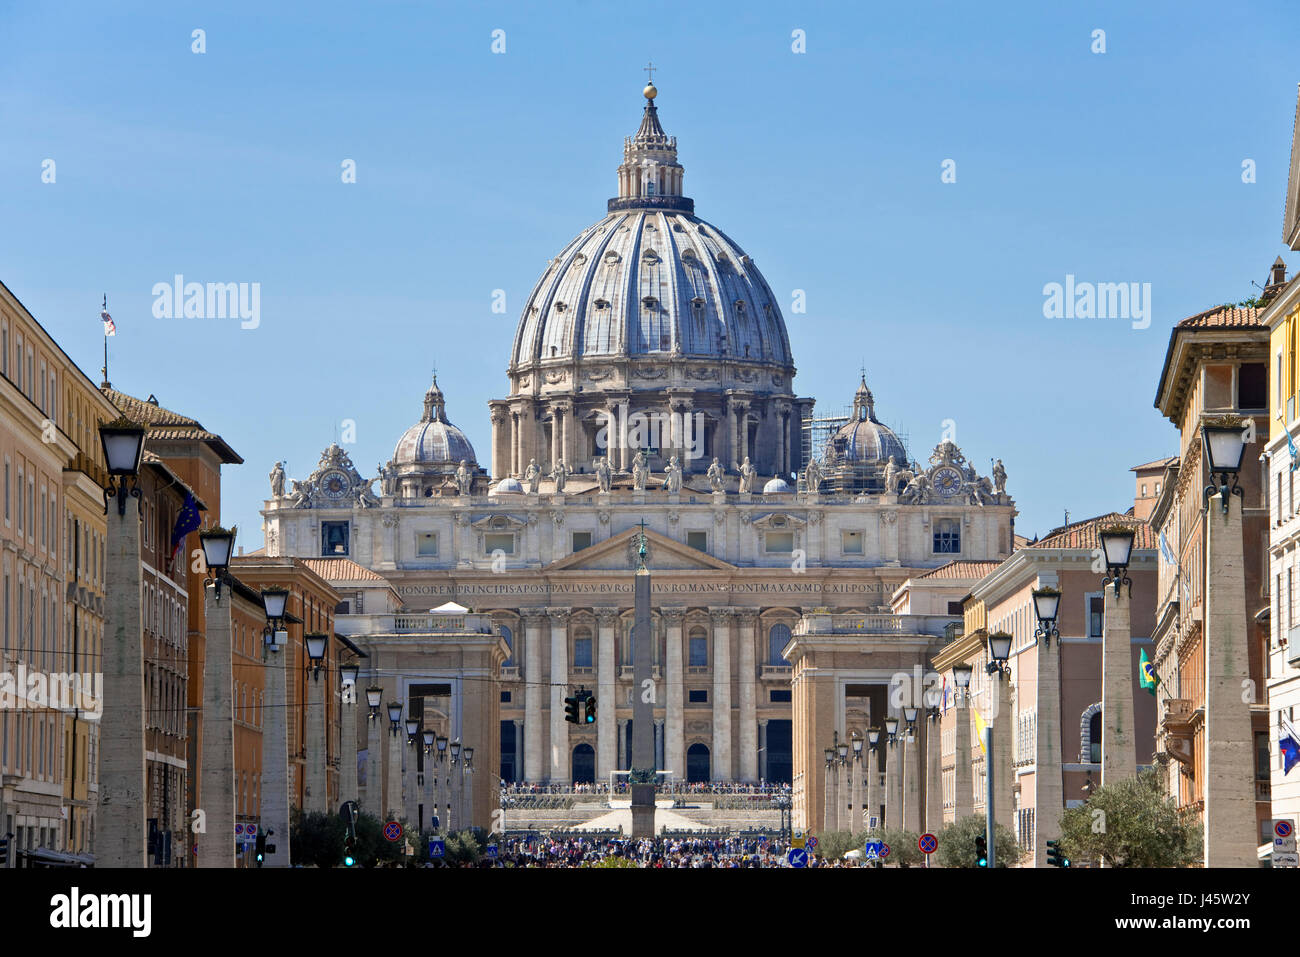 The Papal Basilica of St. Peter in the Vatican 'Basilica Papale di San Pietro in Vaticano' or simply St. Peter's Basilica is an Italian Renaissance ch Stock Photo